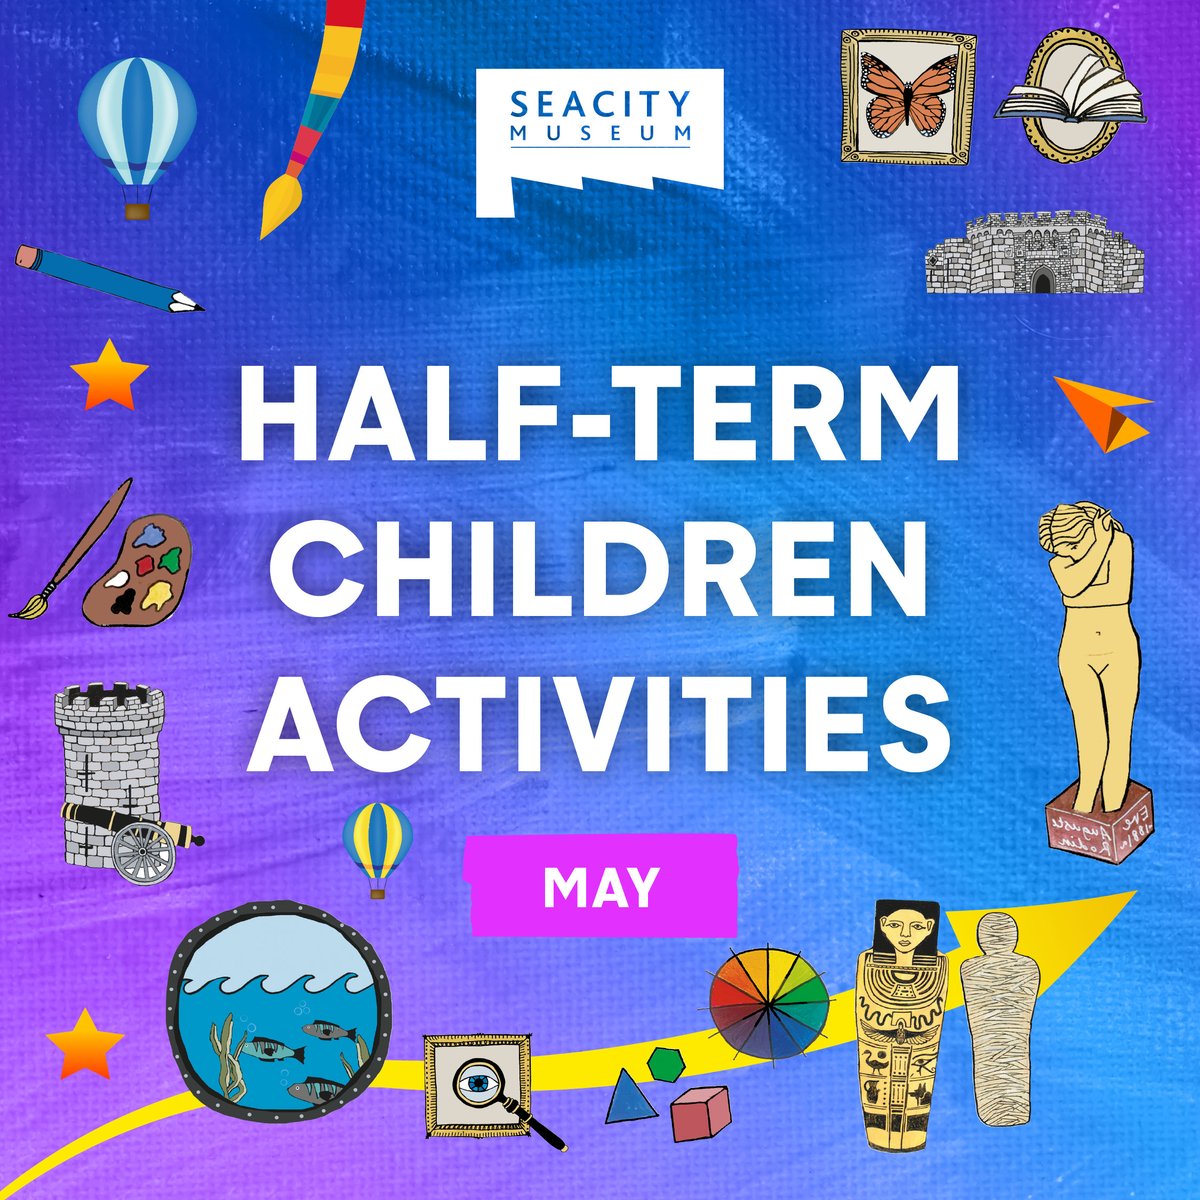 Looking for things to do with the kids next week? We still have spaces on some of our activities starting from tomorrow. From creative family art workshops to fun history sessions. Find out what's on here - wegottickets.com/SouthamptonCul…